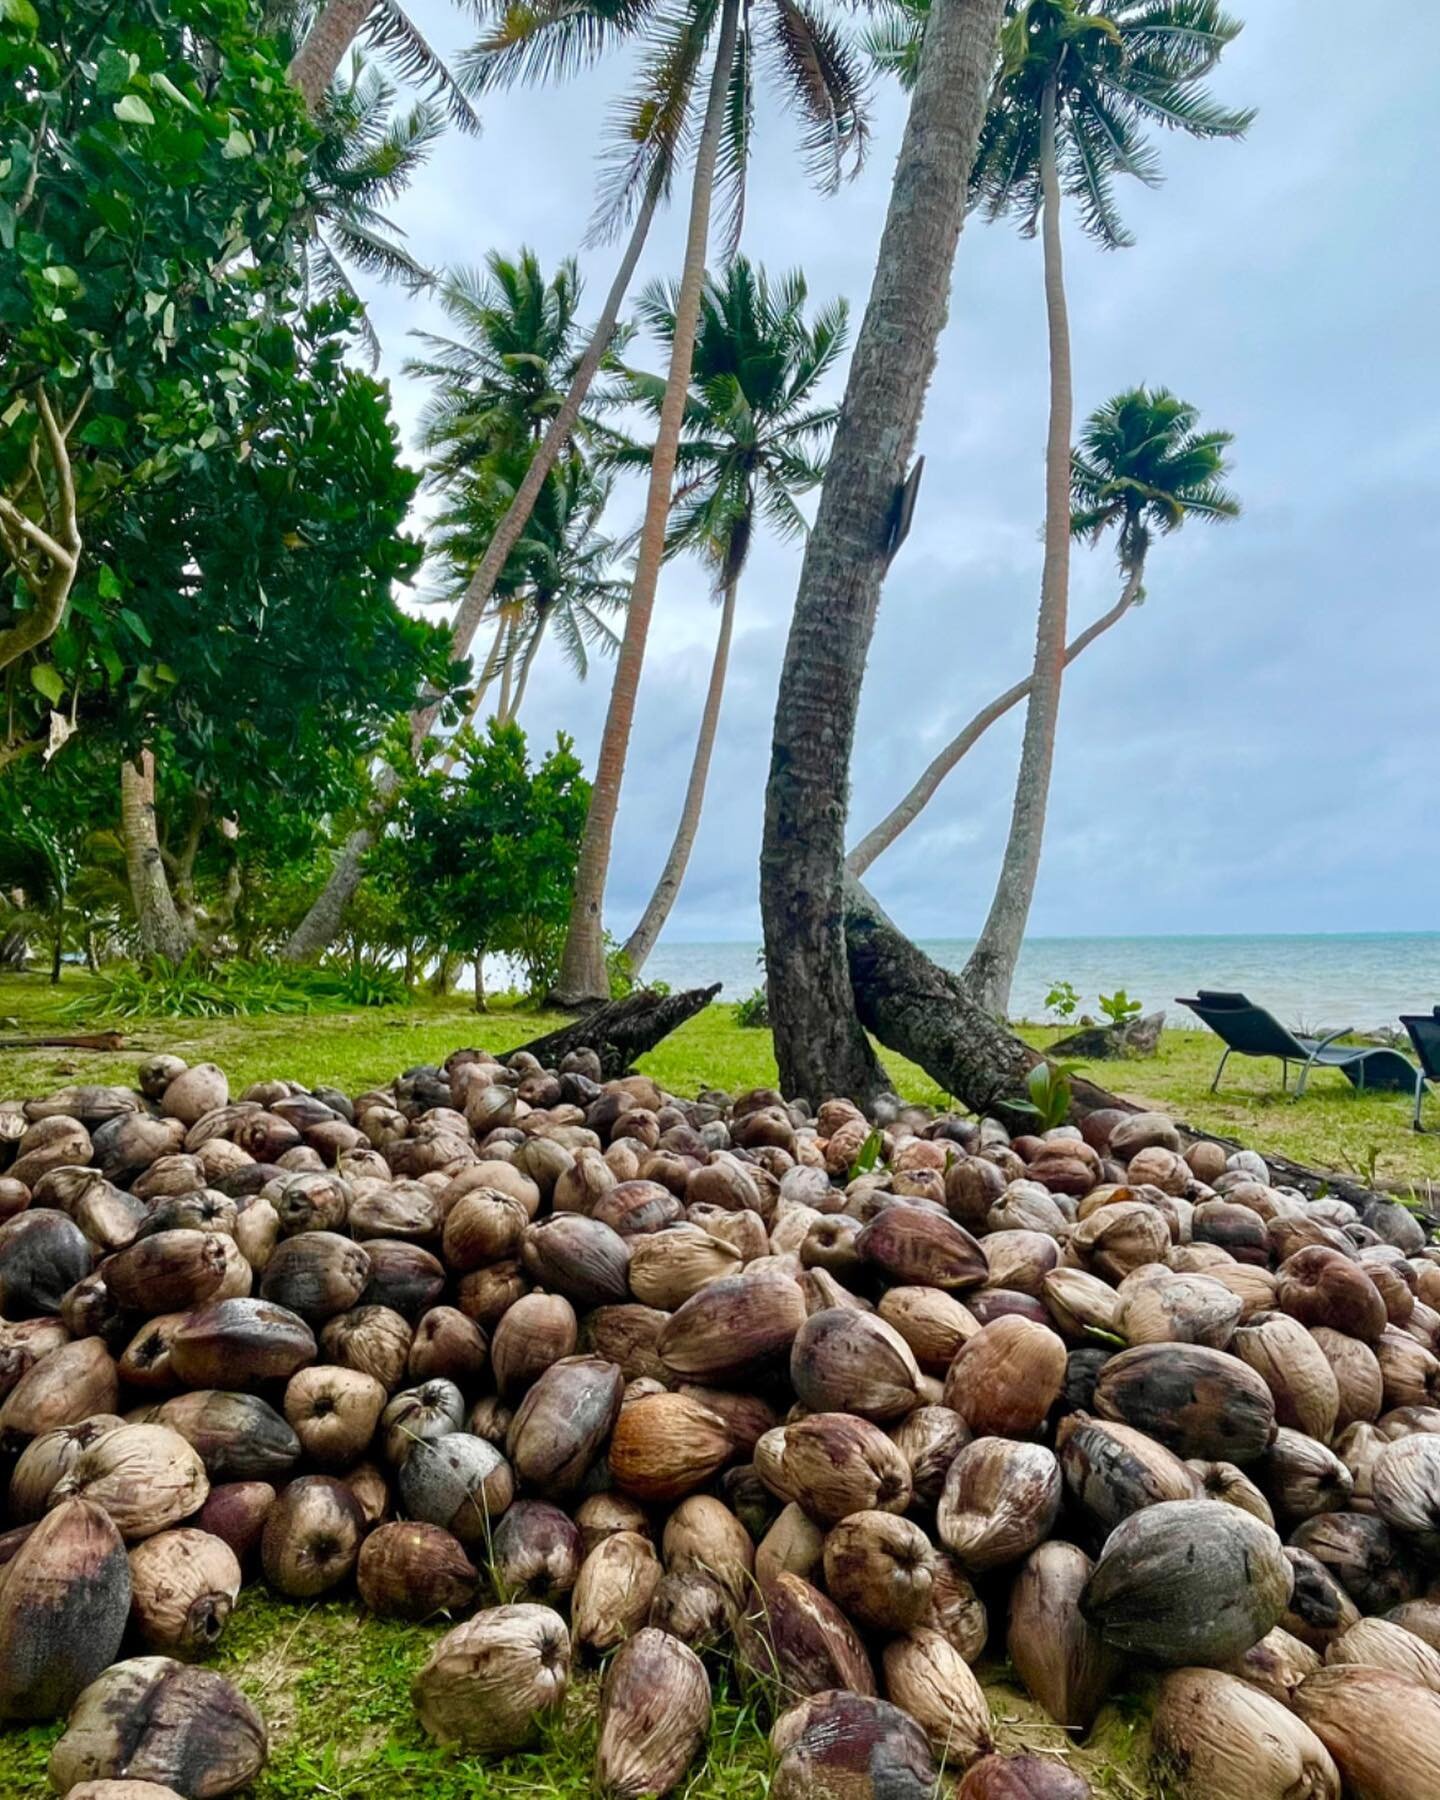 After the Rain. Coconut Collection. 

I asked about coconuts hitting people on the head and the response from my local Fijian friend Vili was, &ldquo;Silly Lara, coconuts don&rsquo;t land on people&rsquo;s heads! Coconuts have eyes too, they know whe